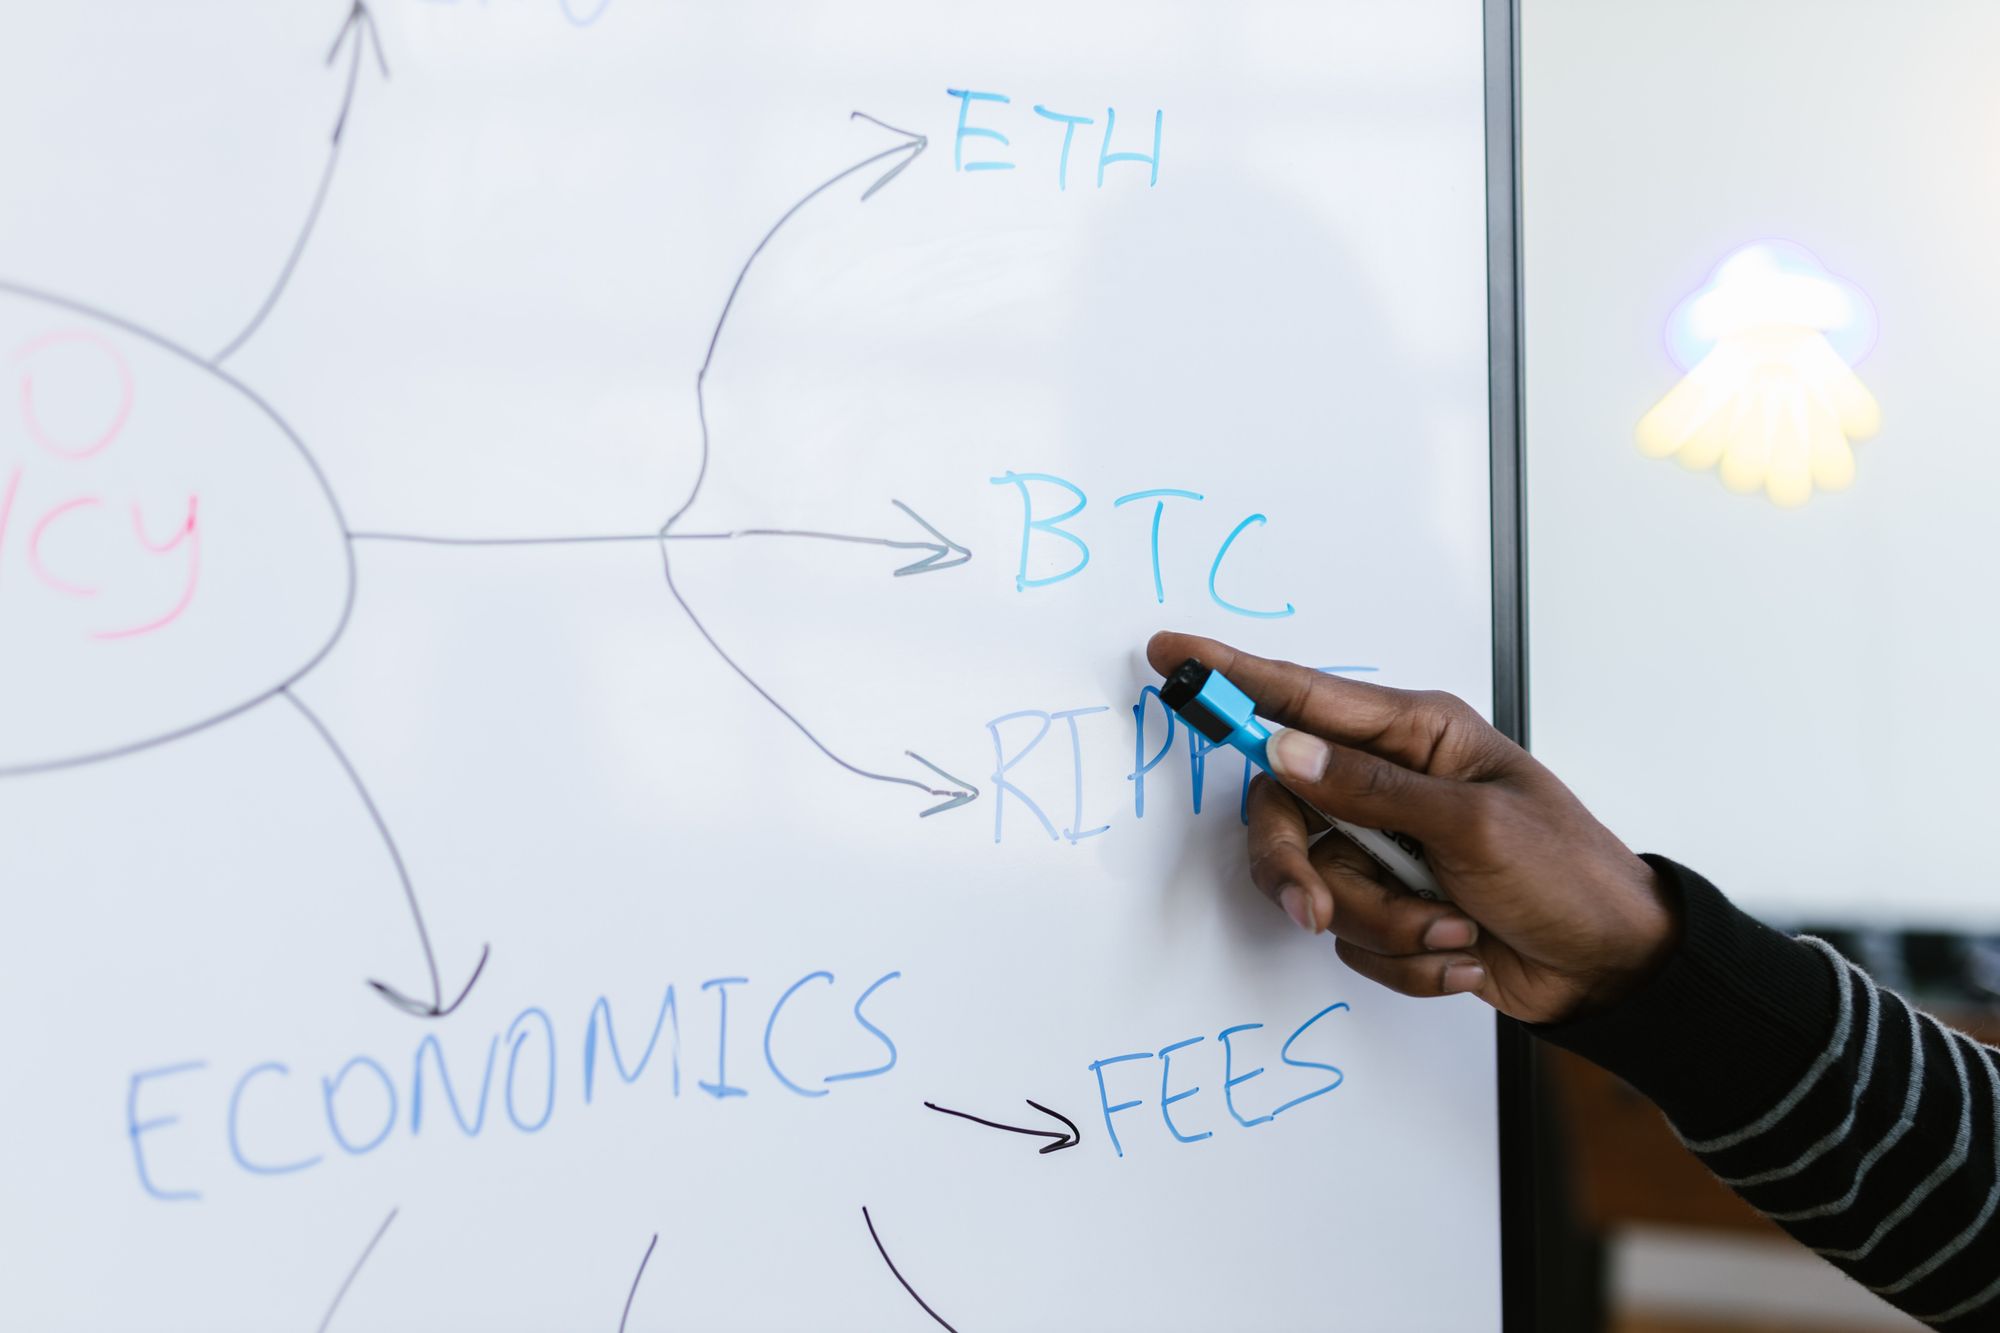 A hand pointing at a whiteboard that has ETH, BTC, RIPPLE, FEES and Economics written on it 